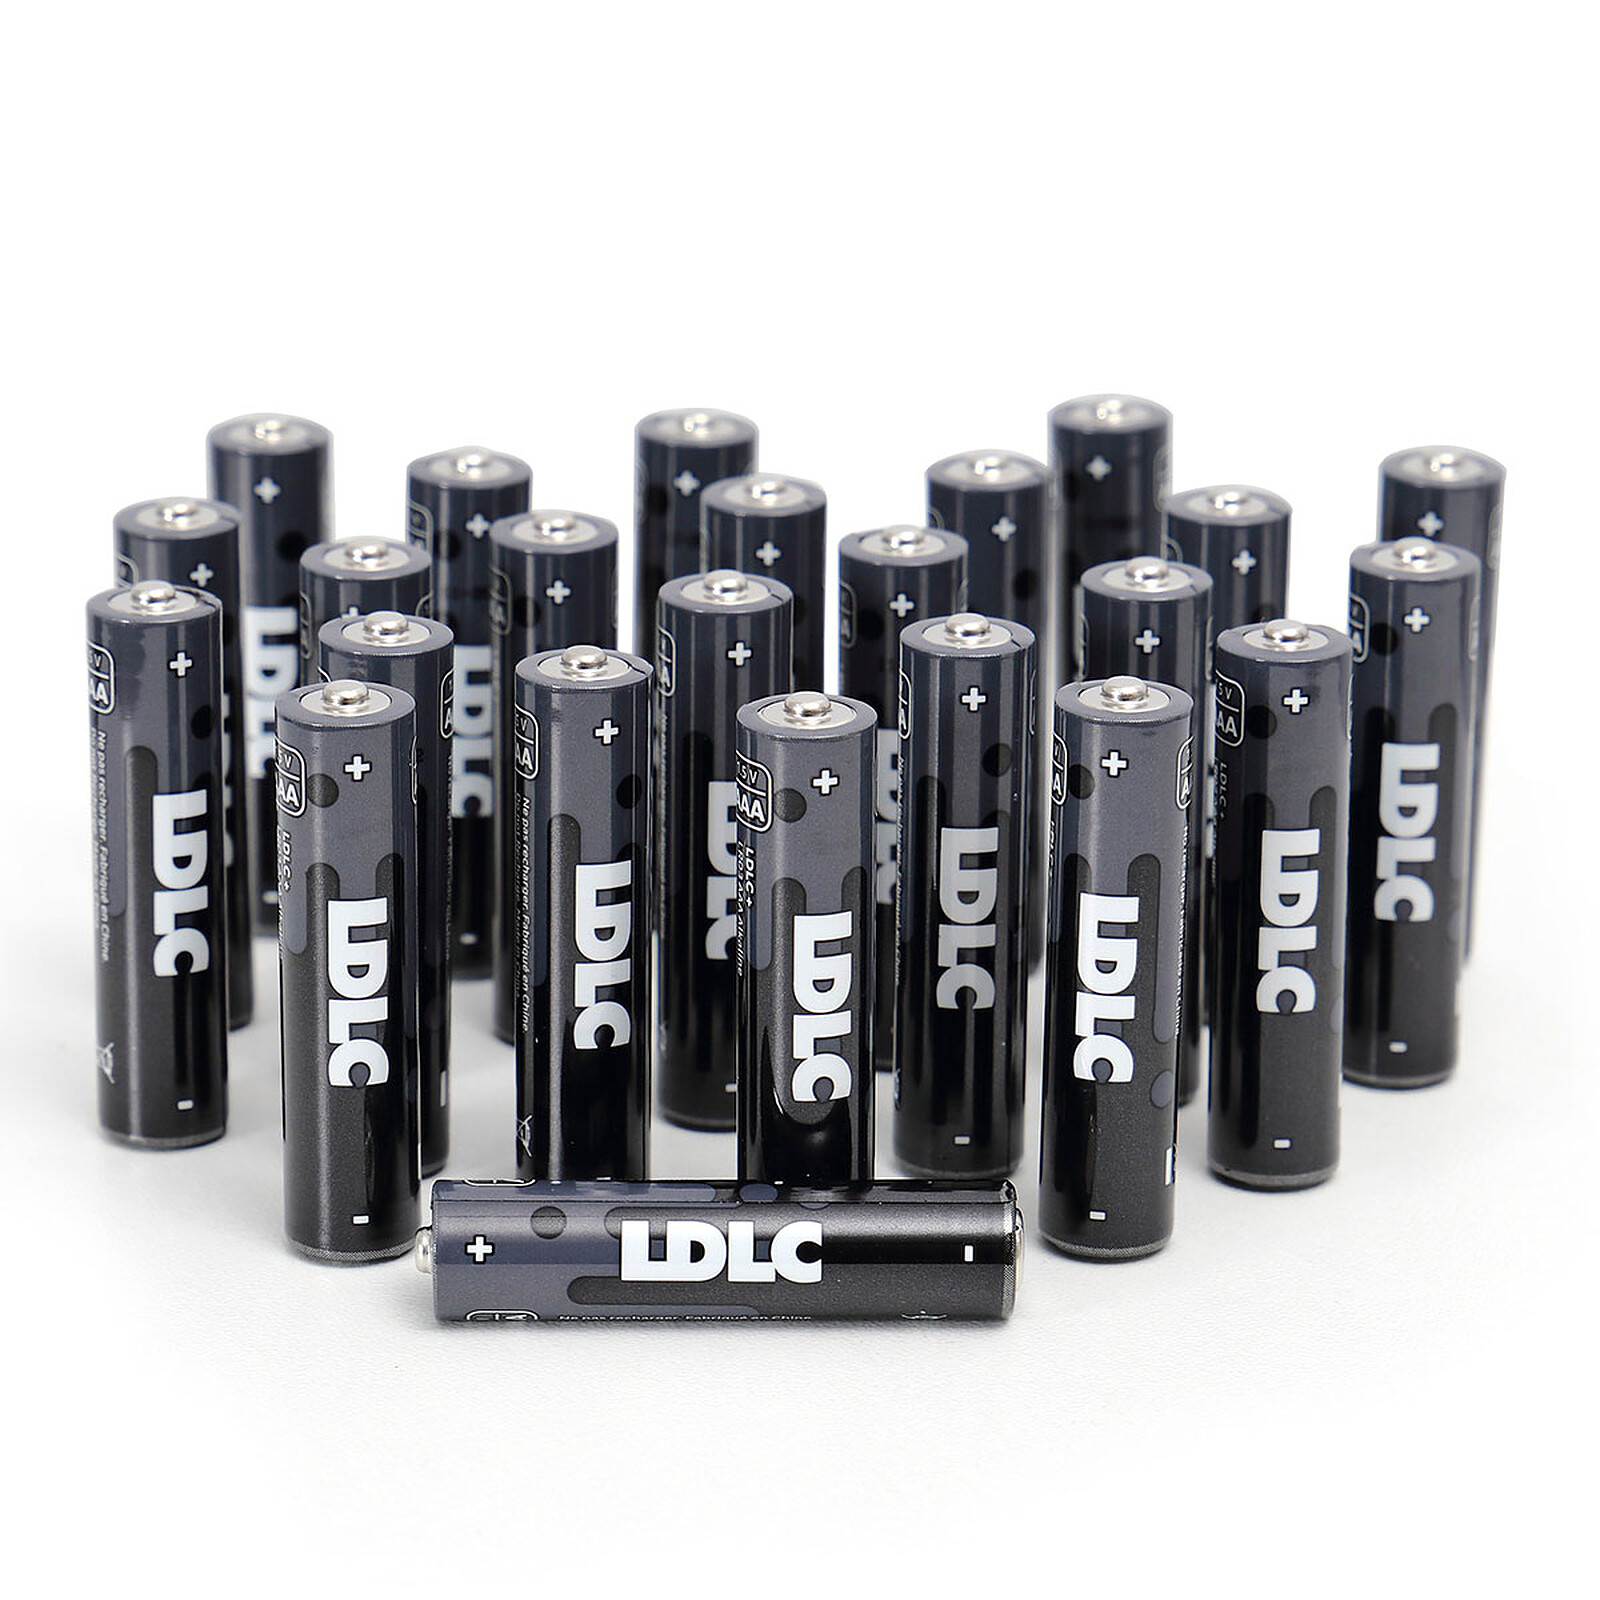 LDLC+ NiMH AA - 4 piles rechargeables AA (HR6) 2000 mAh - Pile & chargeur -  LDLC